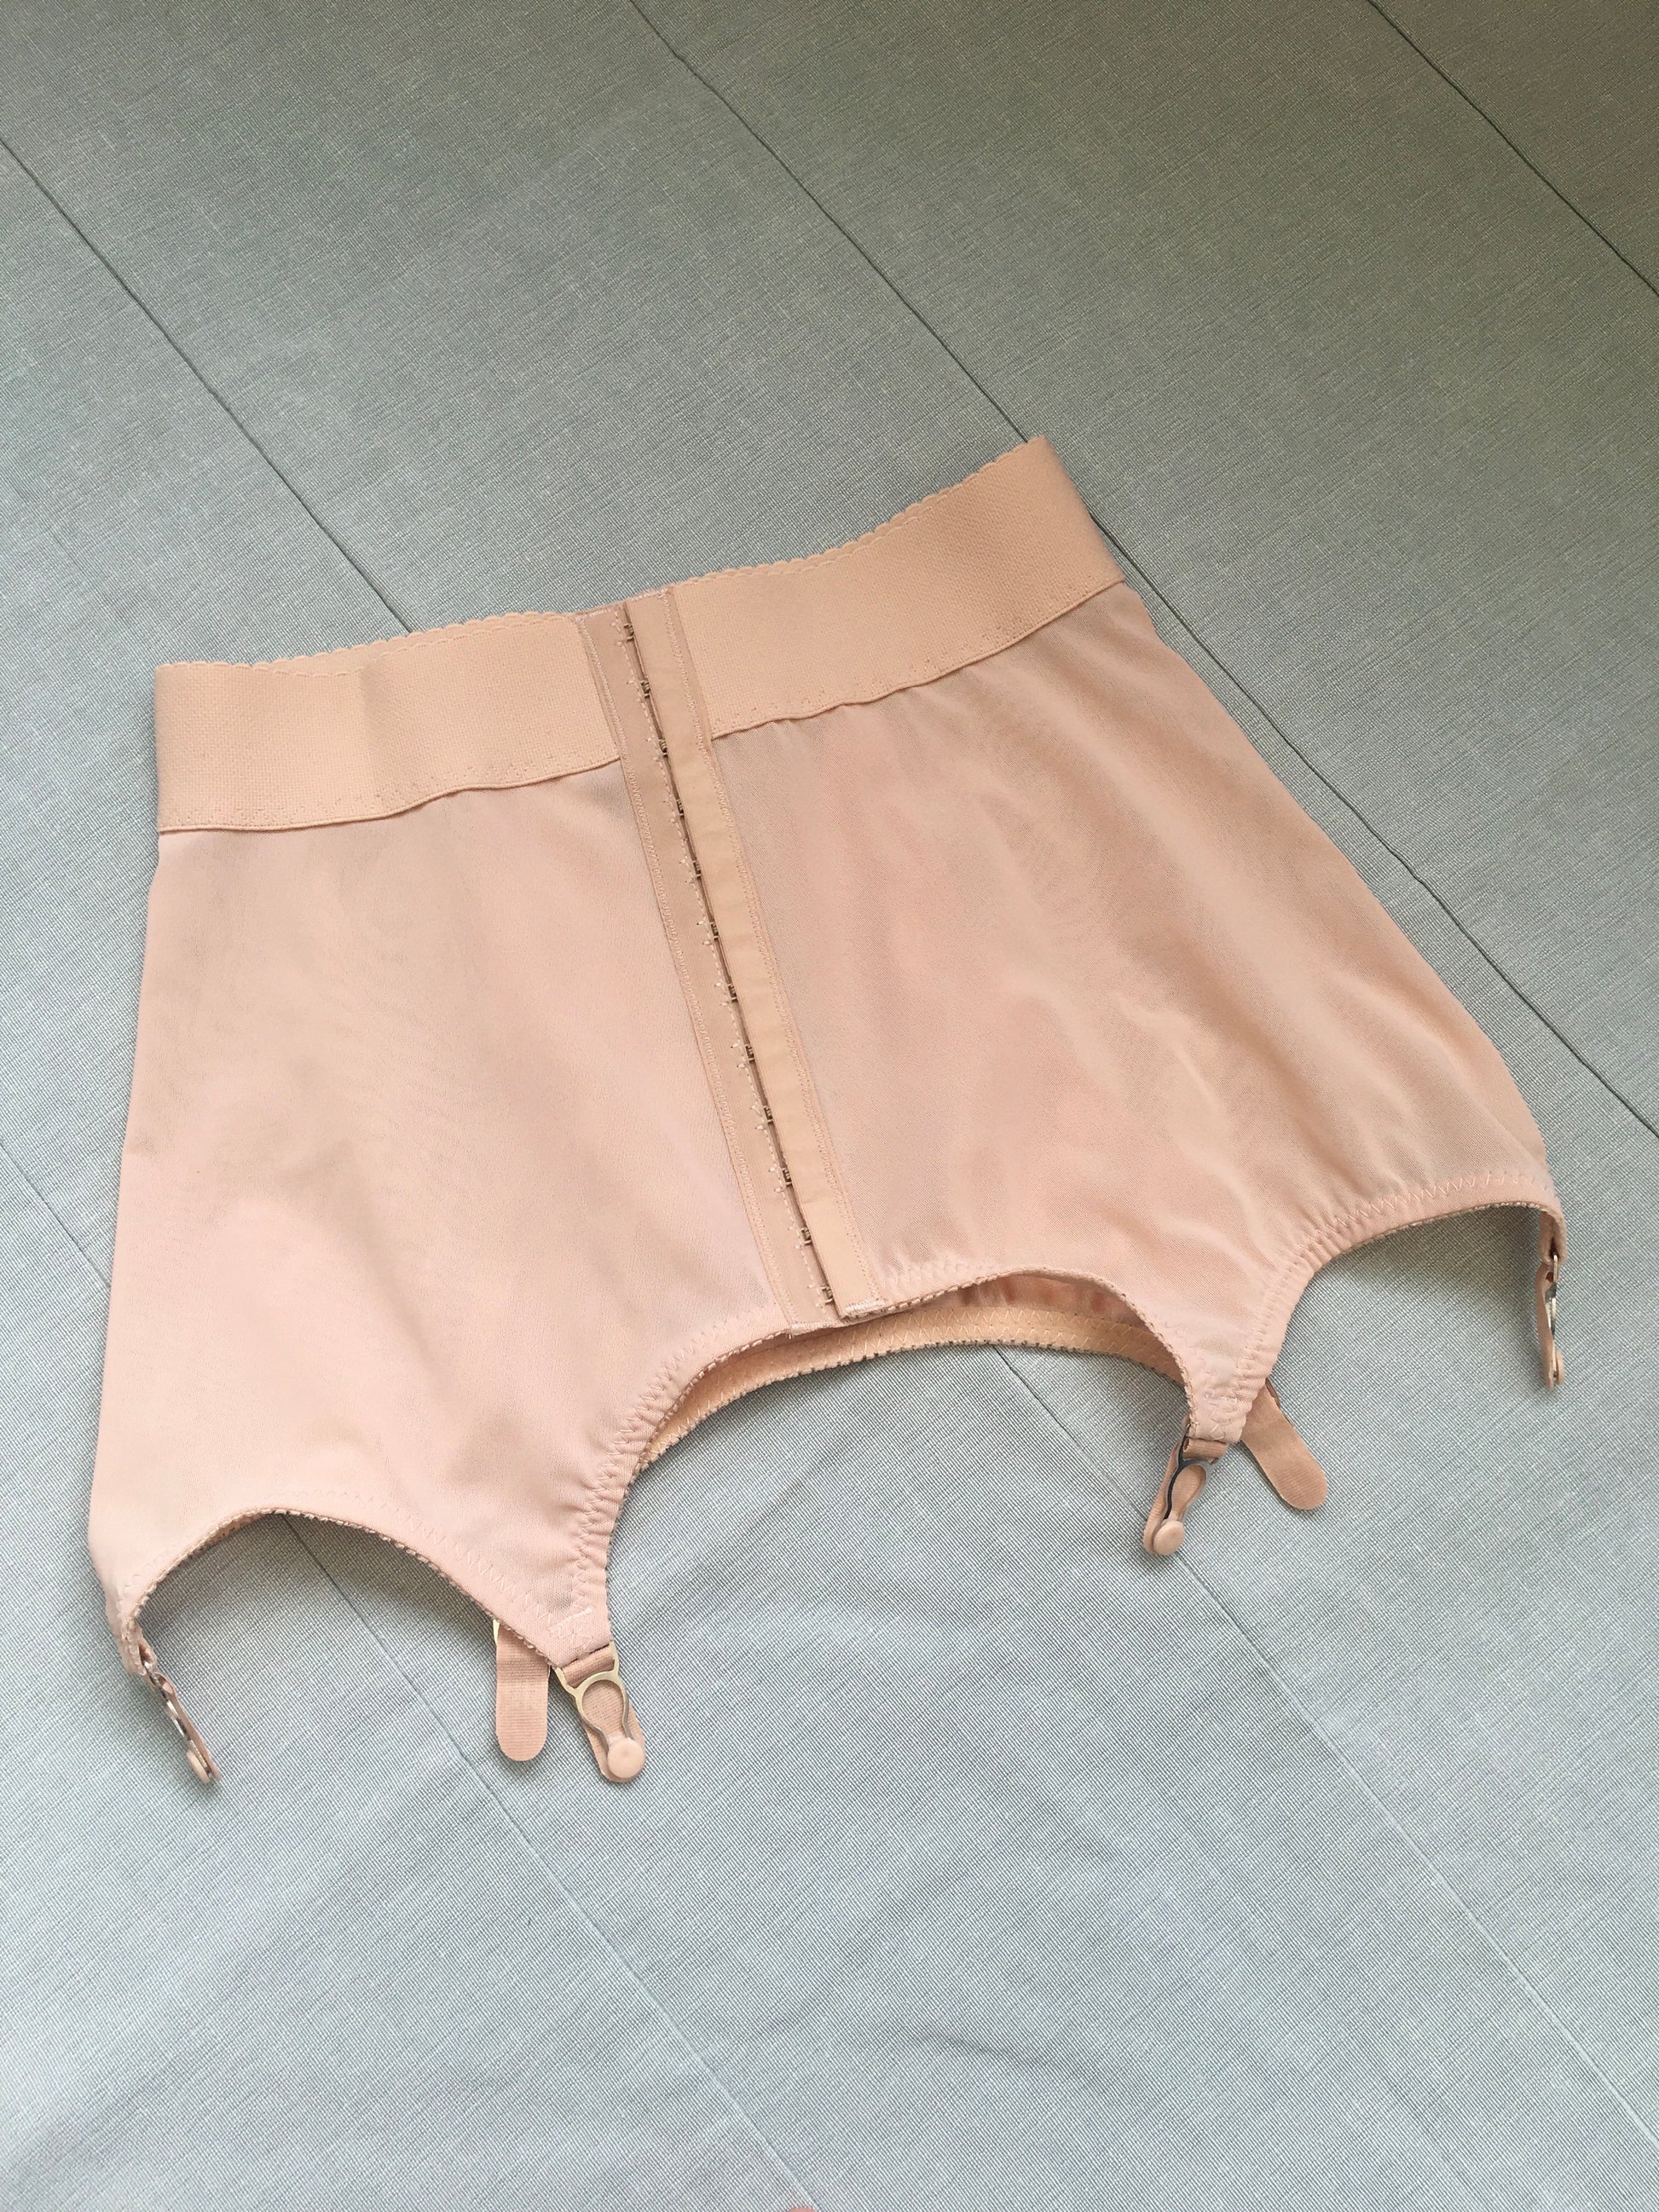 Vintage 1950s inspired shapewear lingerie underwear girdle girdlette longline 1940s suspender belt garter belt in muted vintage peach biscotti colour. Embodded large polka dot Goodwood pattern. Nude 1940s lingerie with six steel suspender clips for nylon seamed stockings, soft bra front fastening bralette and classic cut kickers or high waisted pantie girdles. Fetish bettie page style lingerie made in the UK by Pip and Pantalaimon